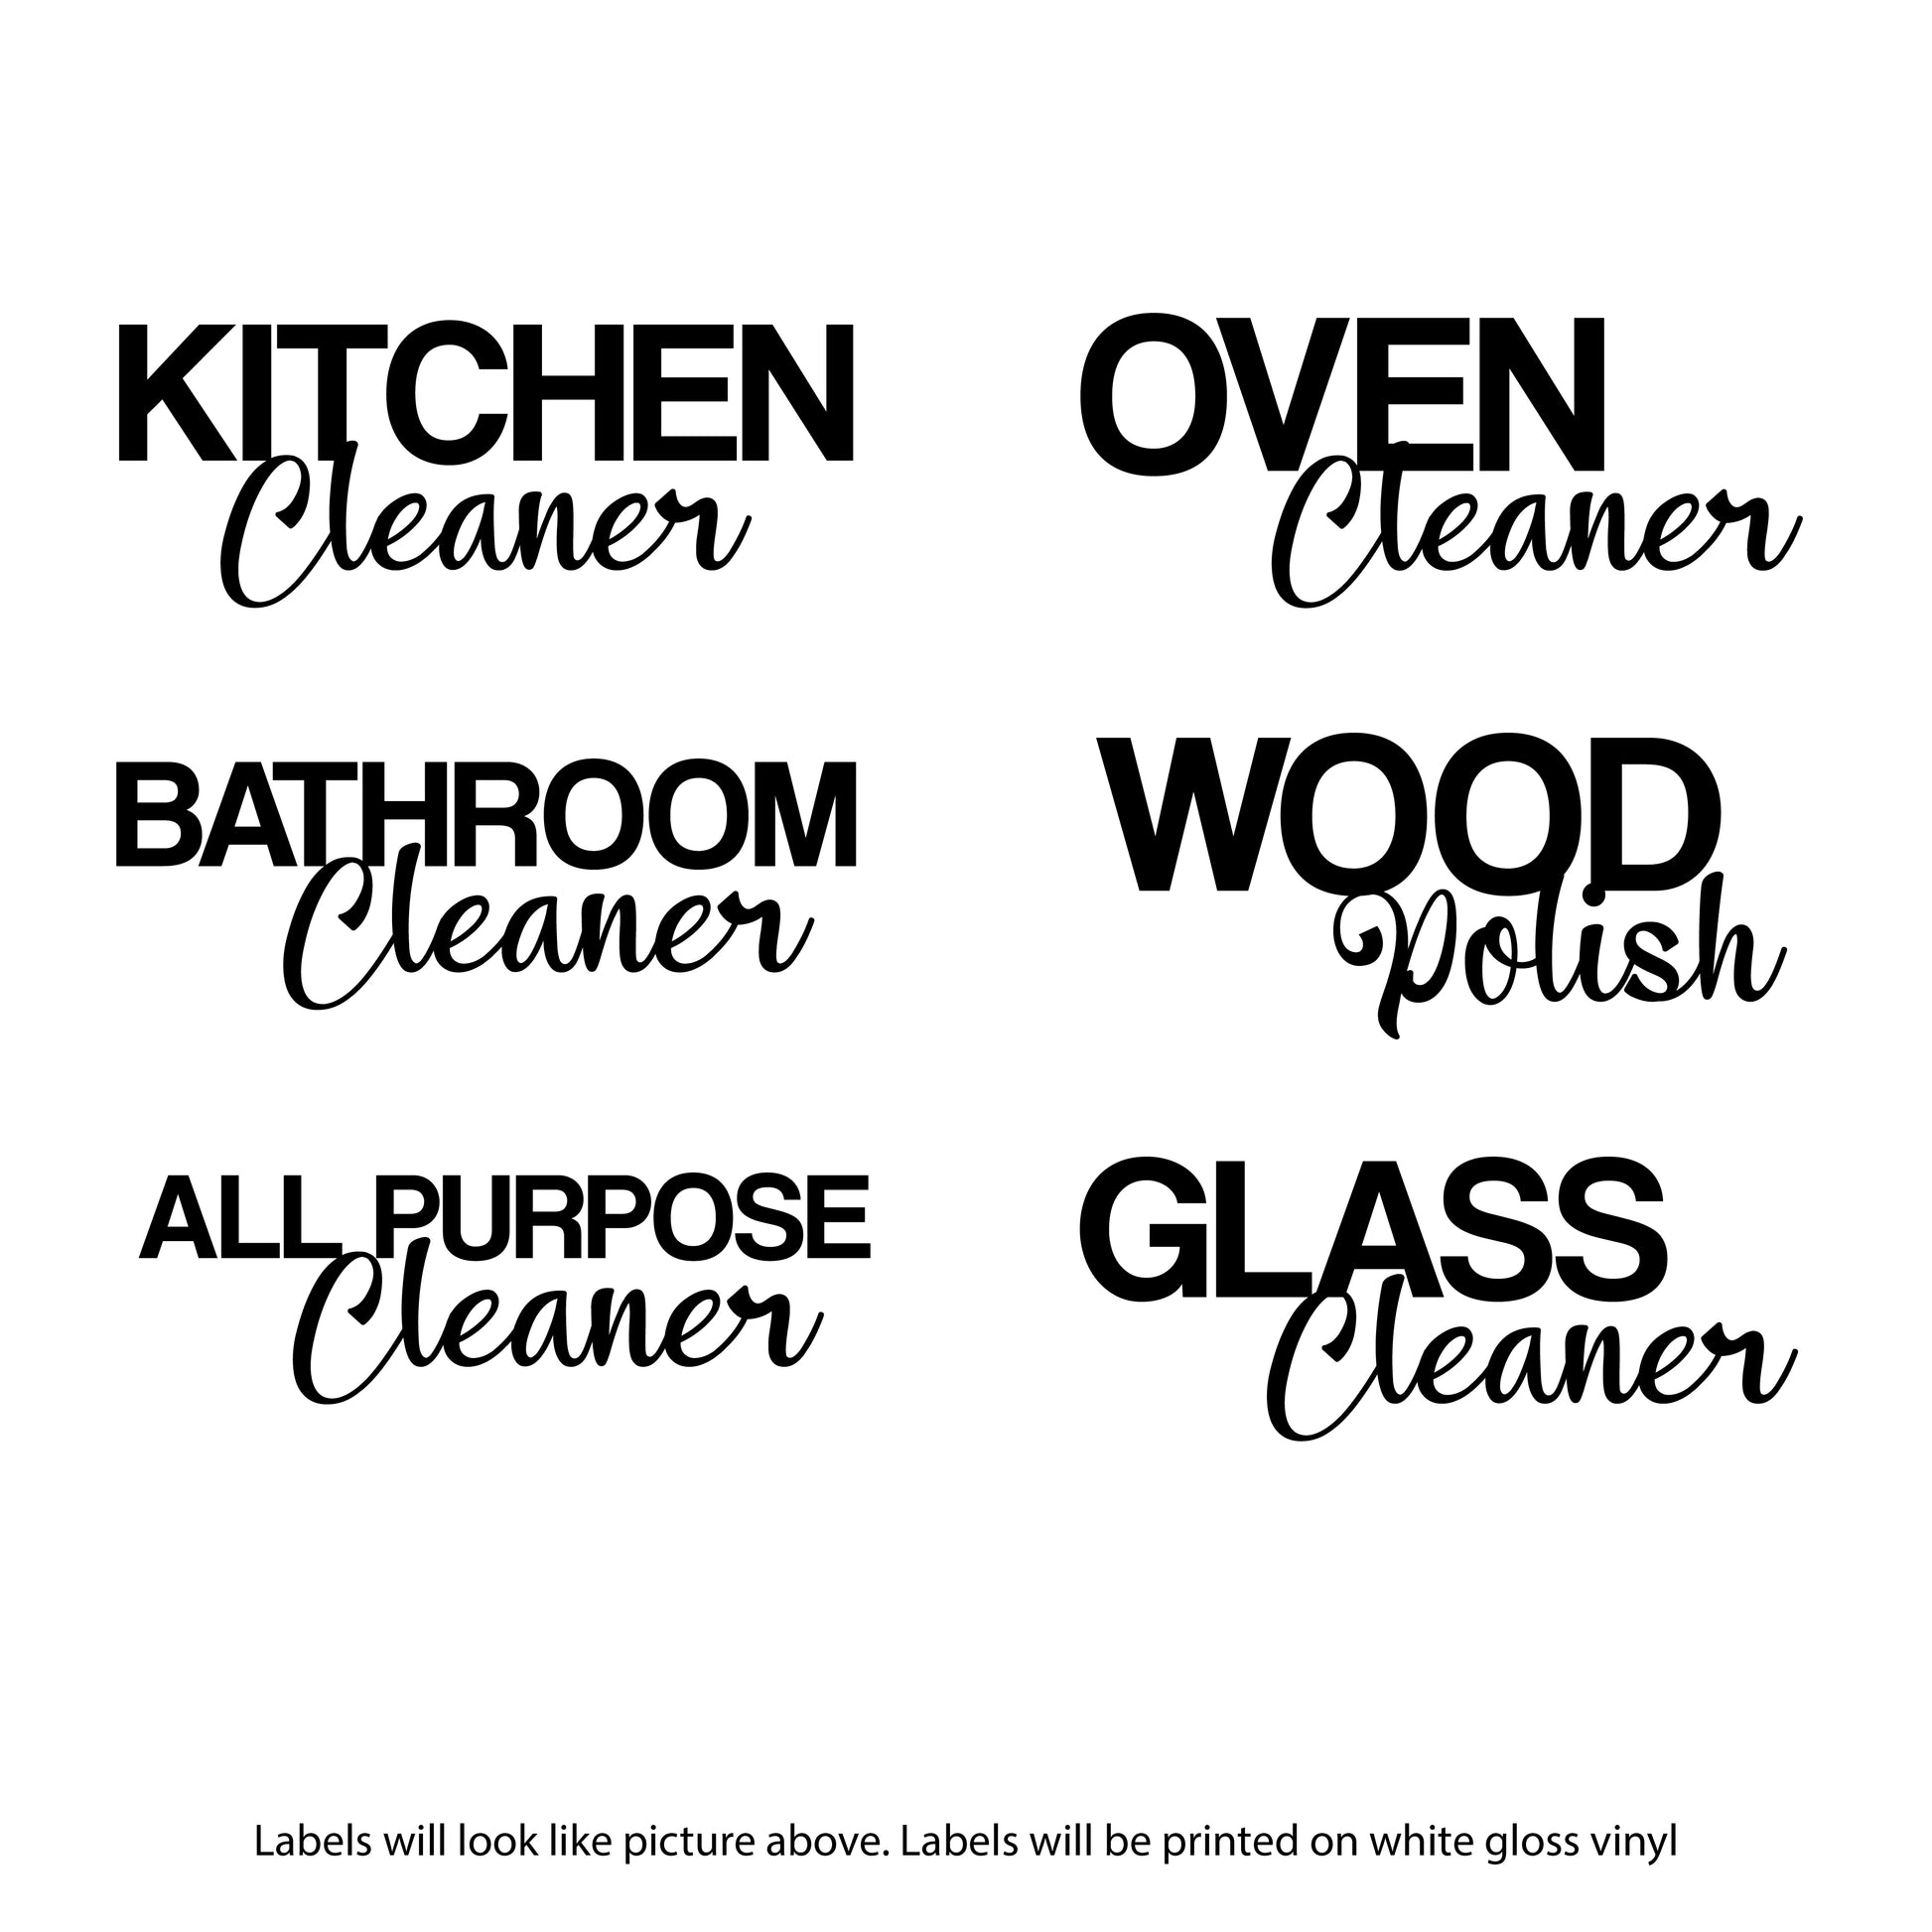 Vinyl Decal DIY Cleaning Labels with FREE Recipe Download - ENGLISH & AFRIKAANS - English with ALL PURPOSE - essentoils.co.za